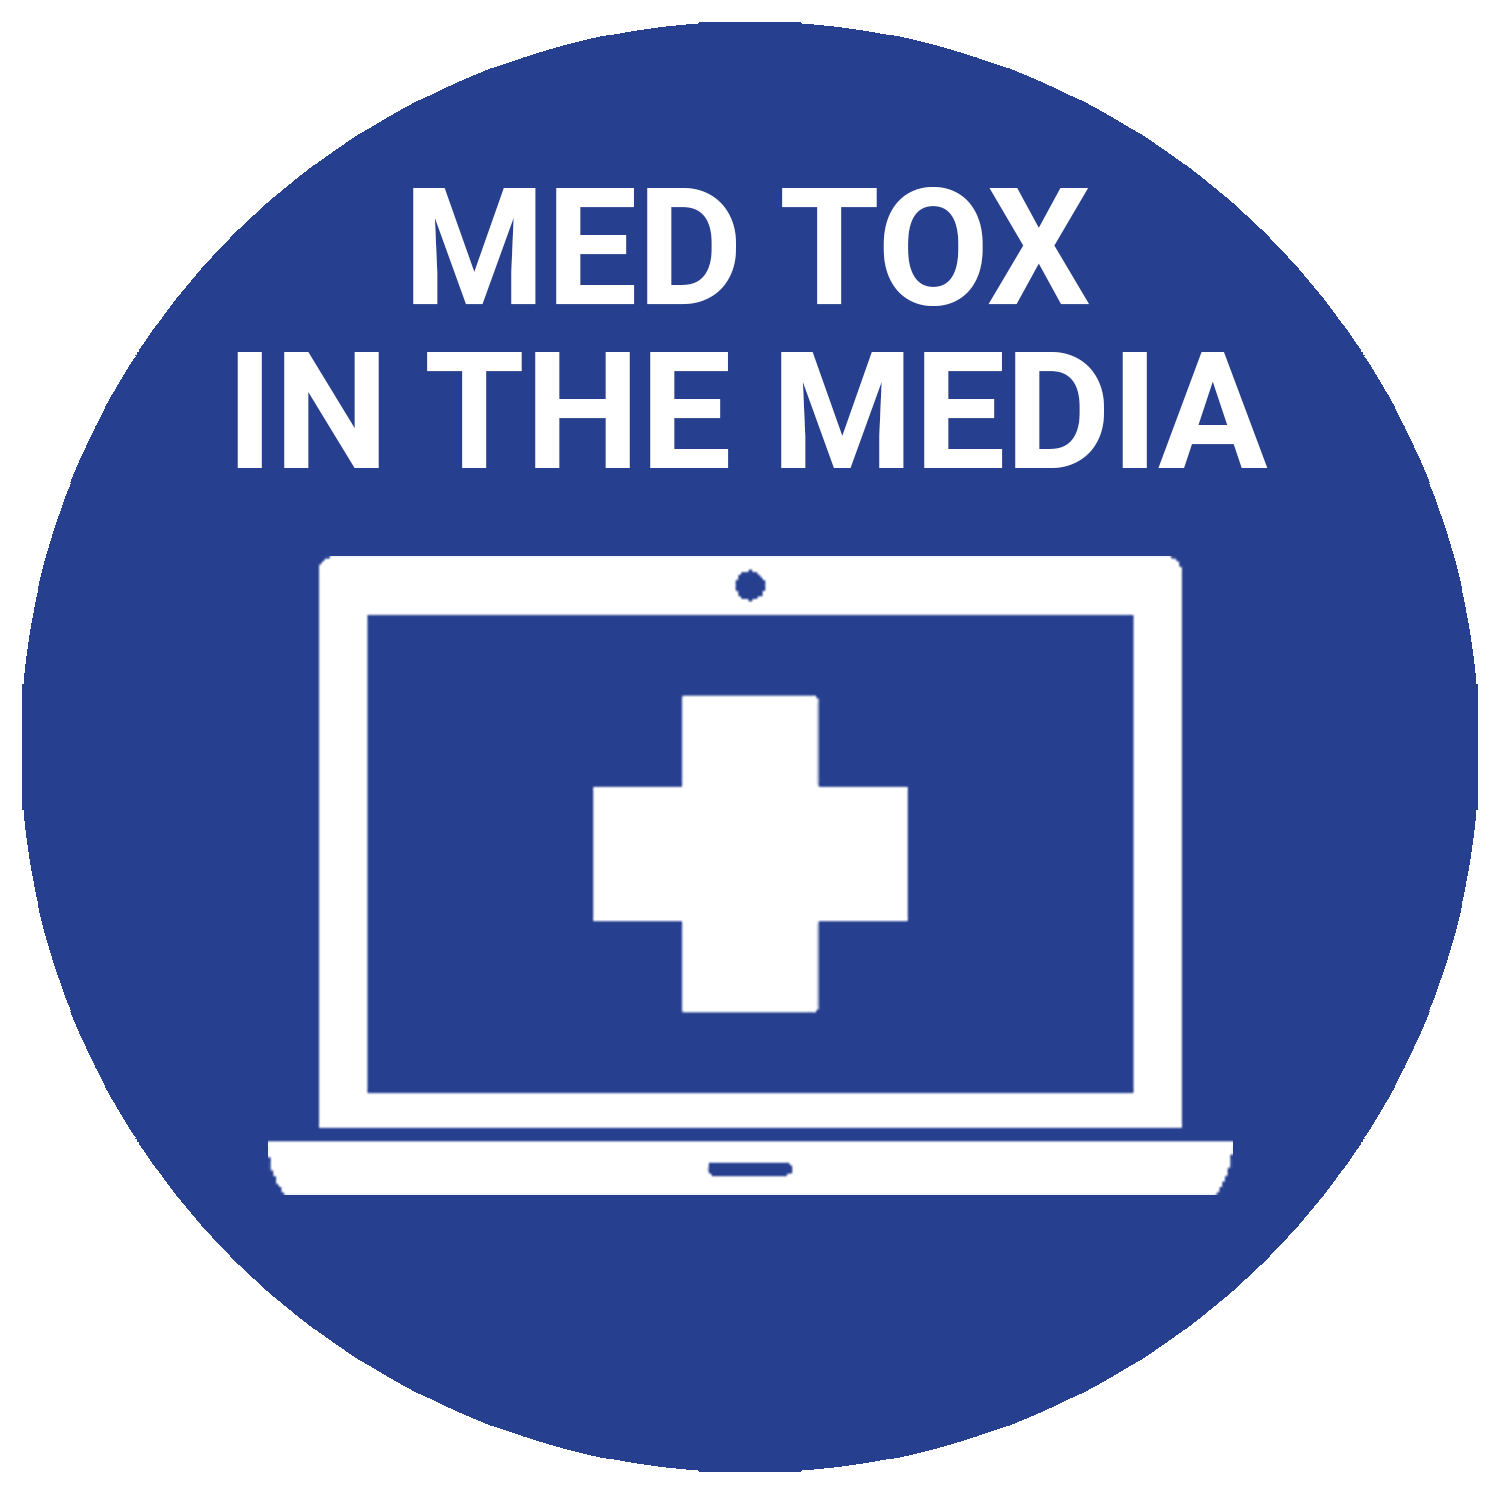 Med Tox in the Media - ACMT